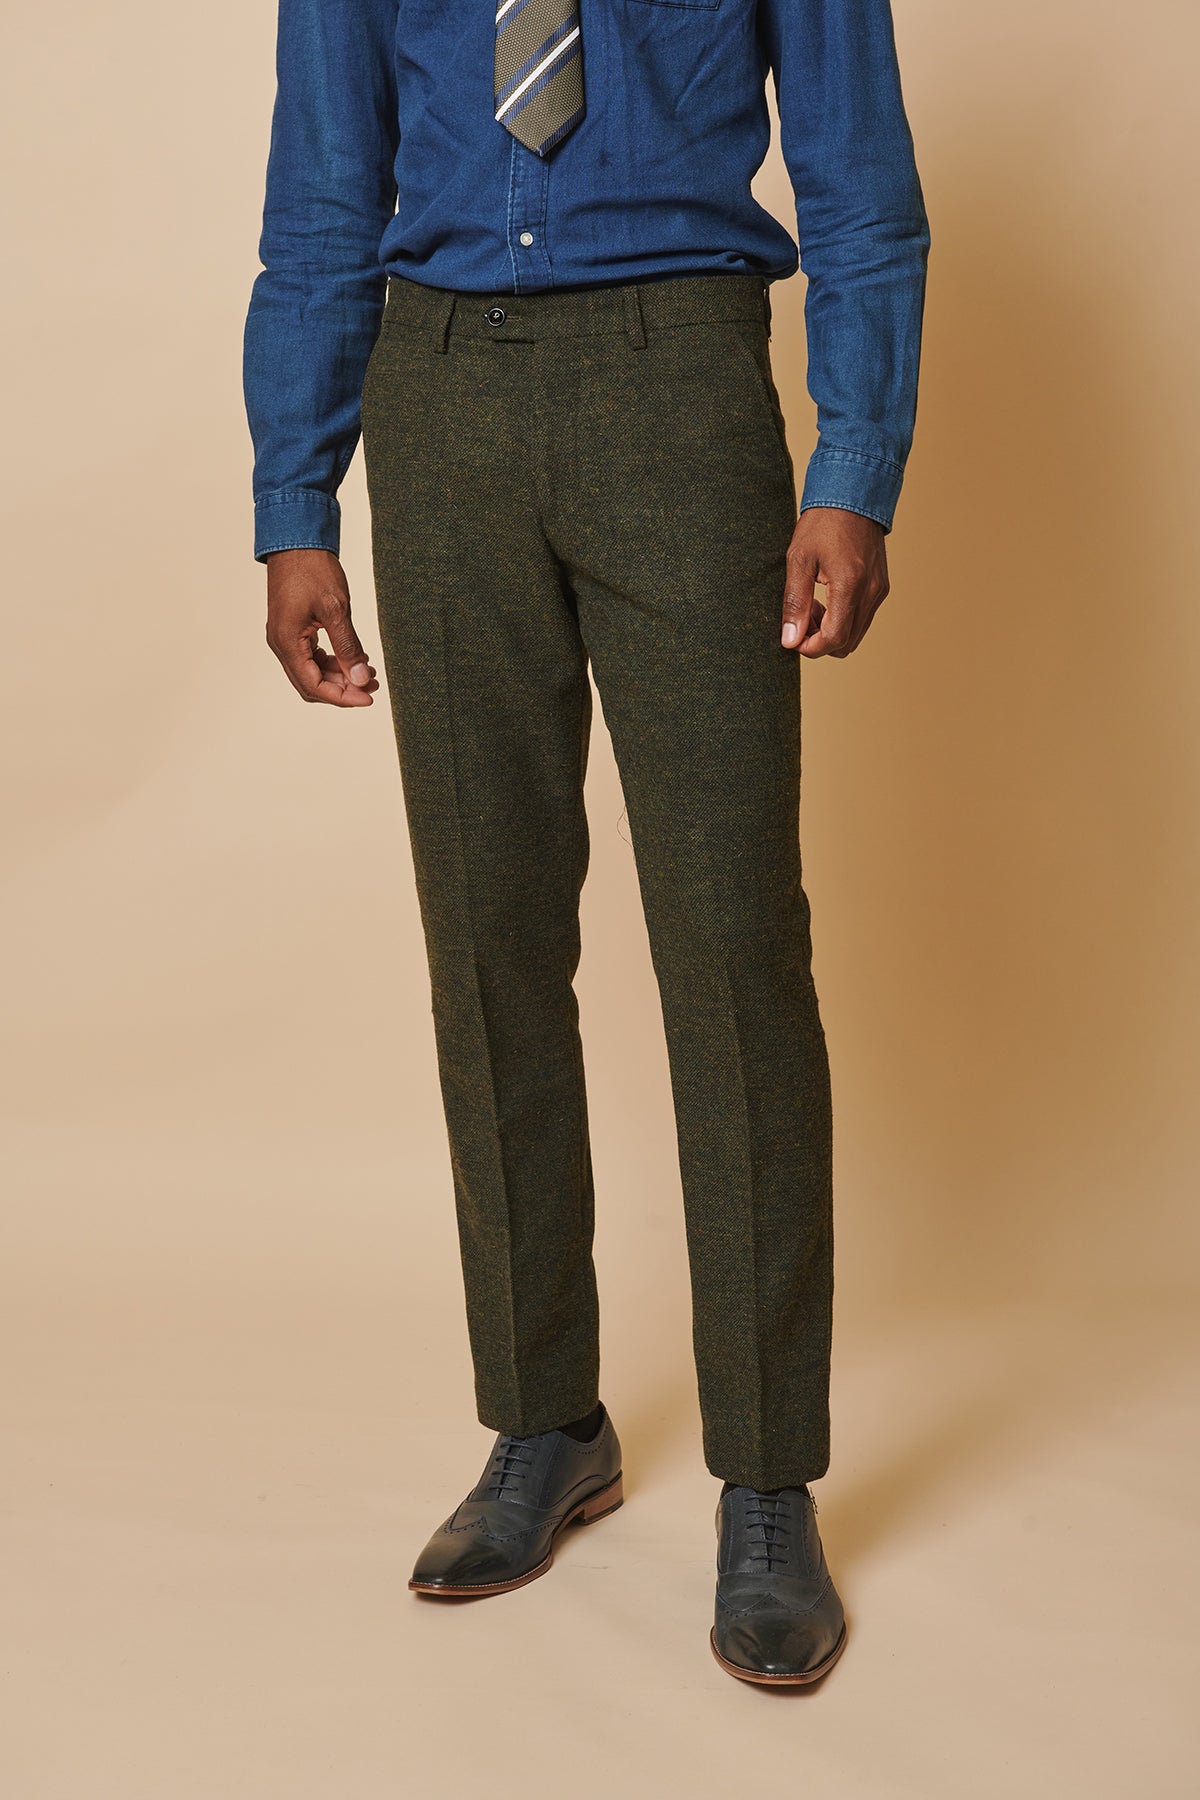 MARLOW - Olive Green Tweed Trousers – Marc Darcy